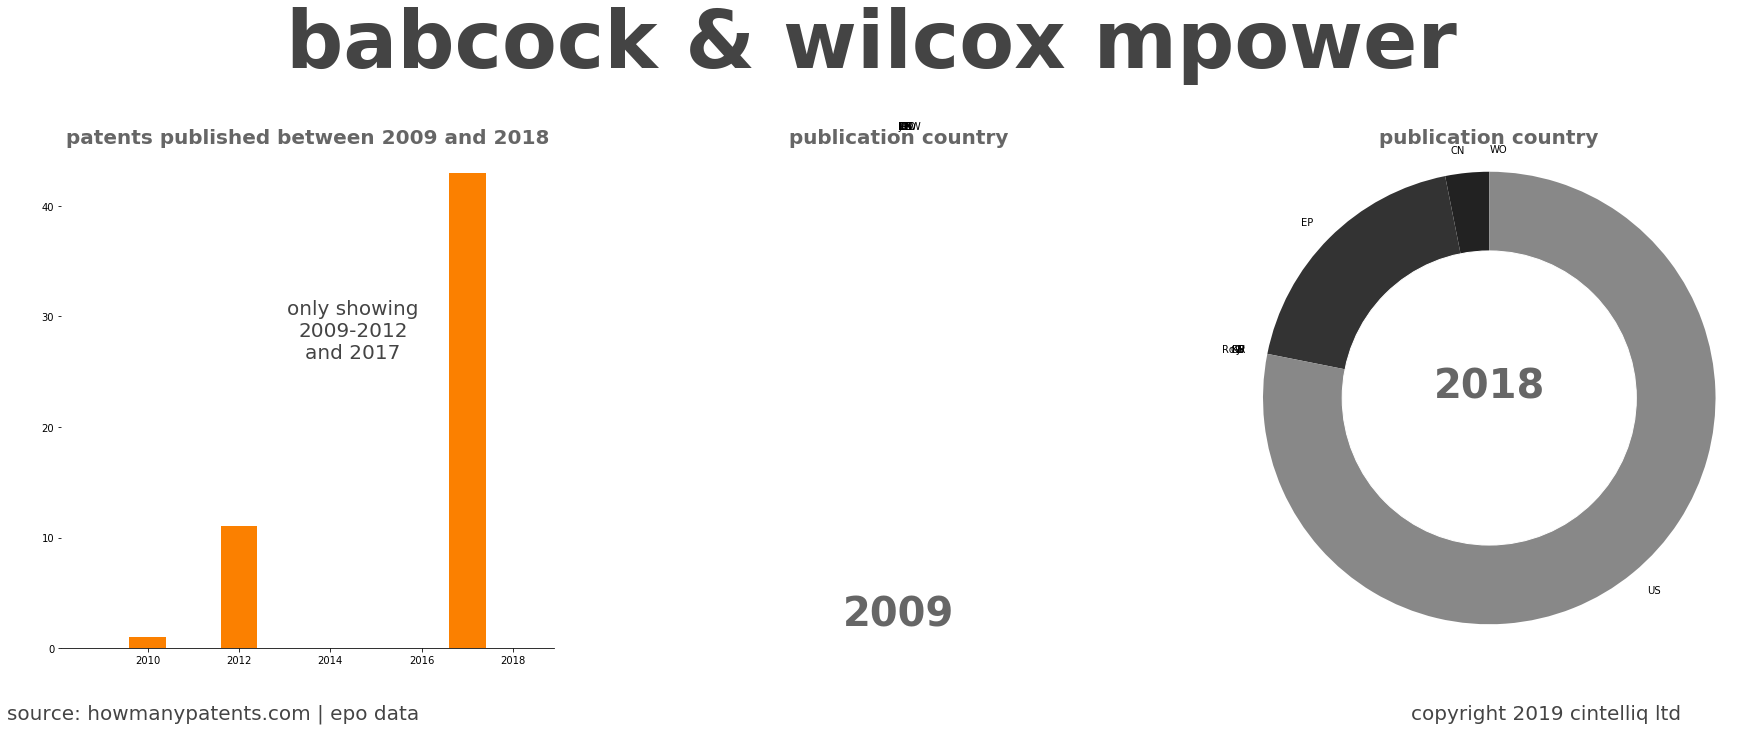 summary of patents for Babcock & Wilcox Mpower